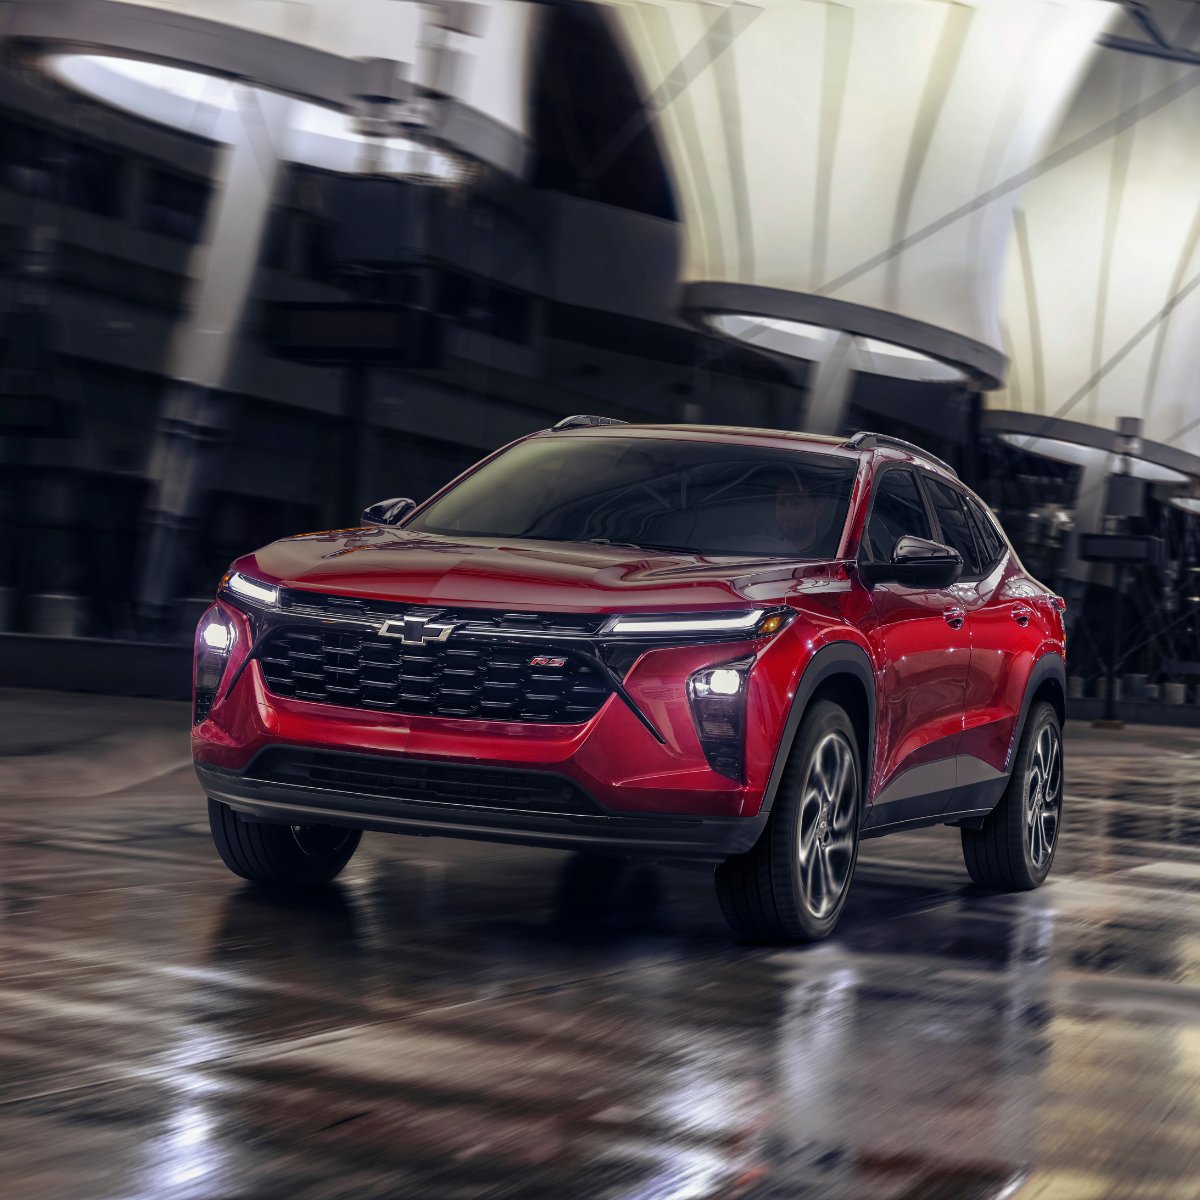 Did you hear about the 2024 Chevrolet Trax announcement? 😲
Which colour would you get: the fresh Cacti Green or the bold Crimson Metallic? 

.
.
.
.
.
.
@chevrolet #chevrolet #trax #2024trax #albertadealership #lakewoodchevrolet